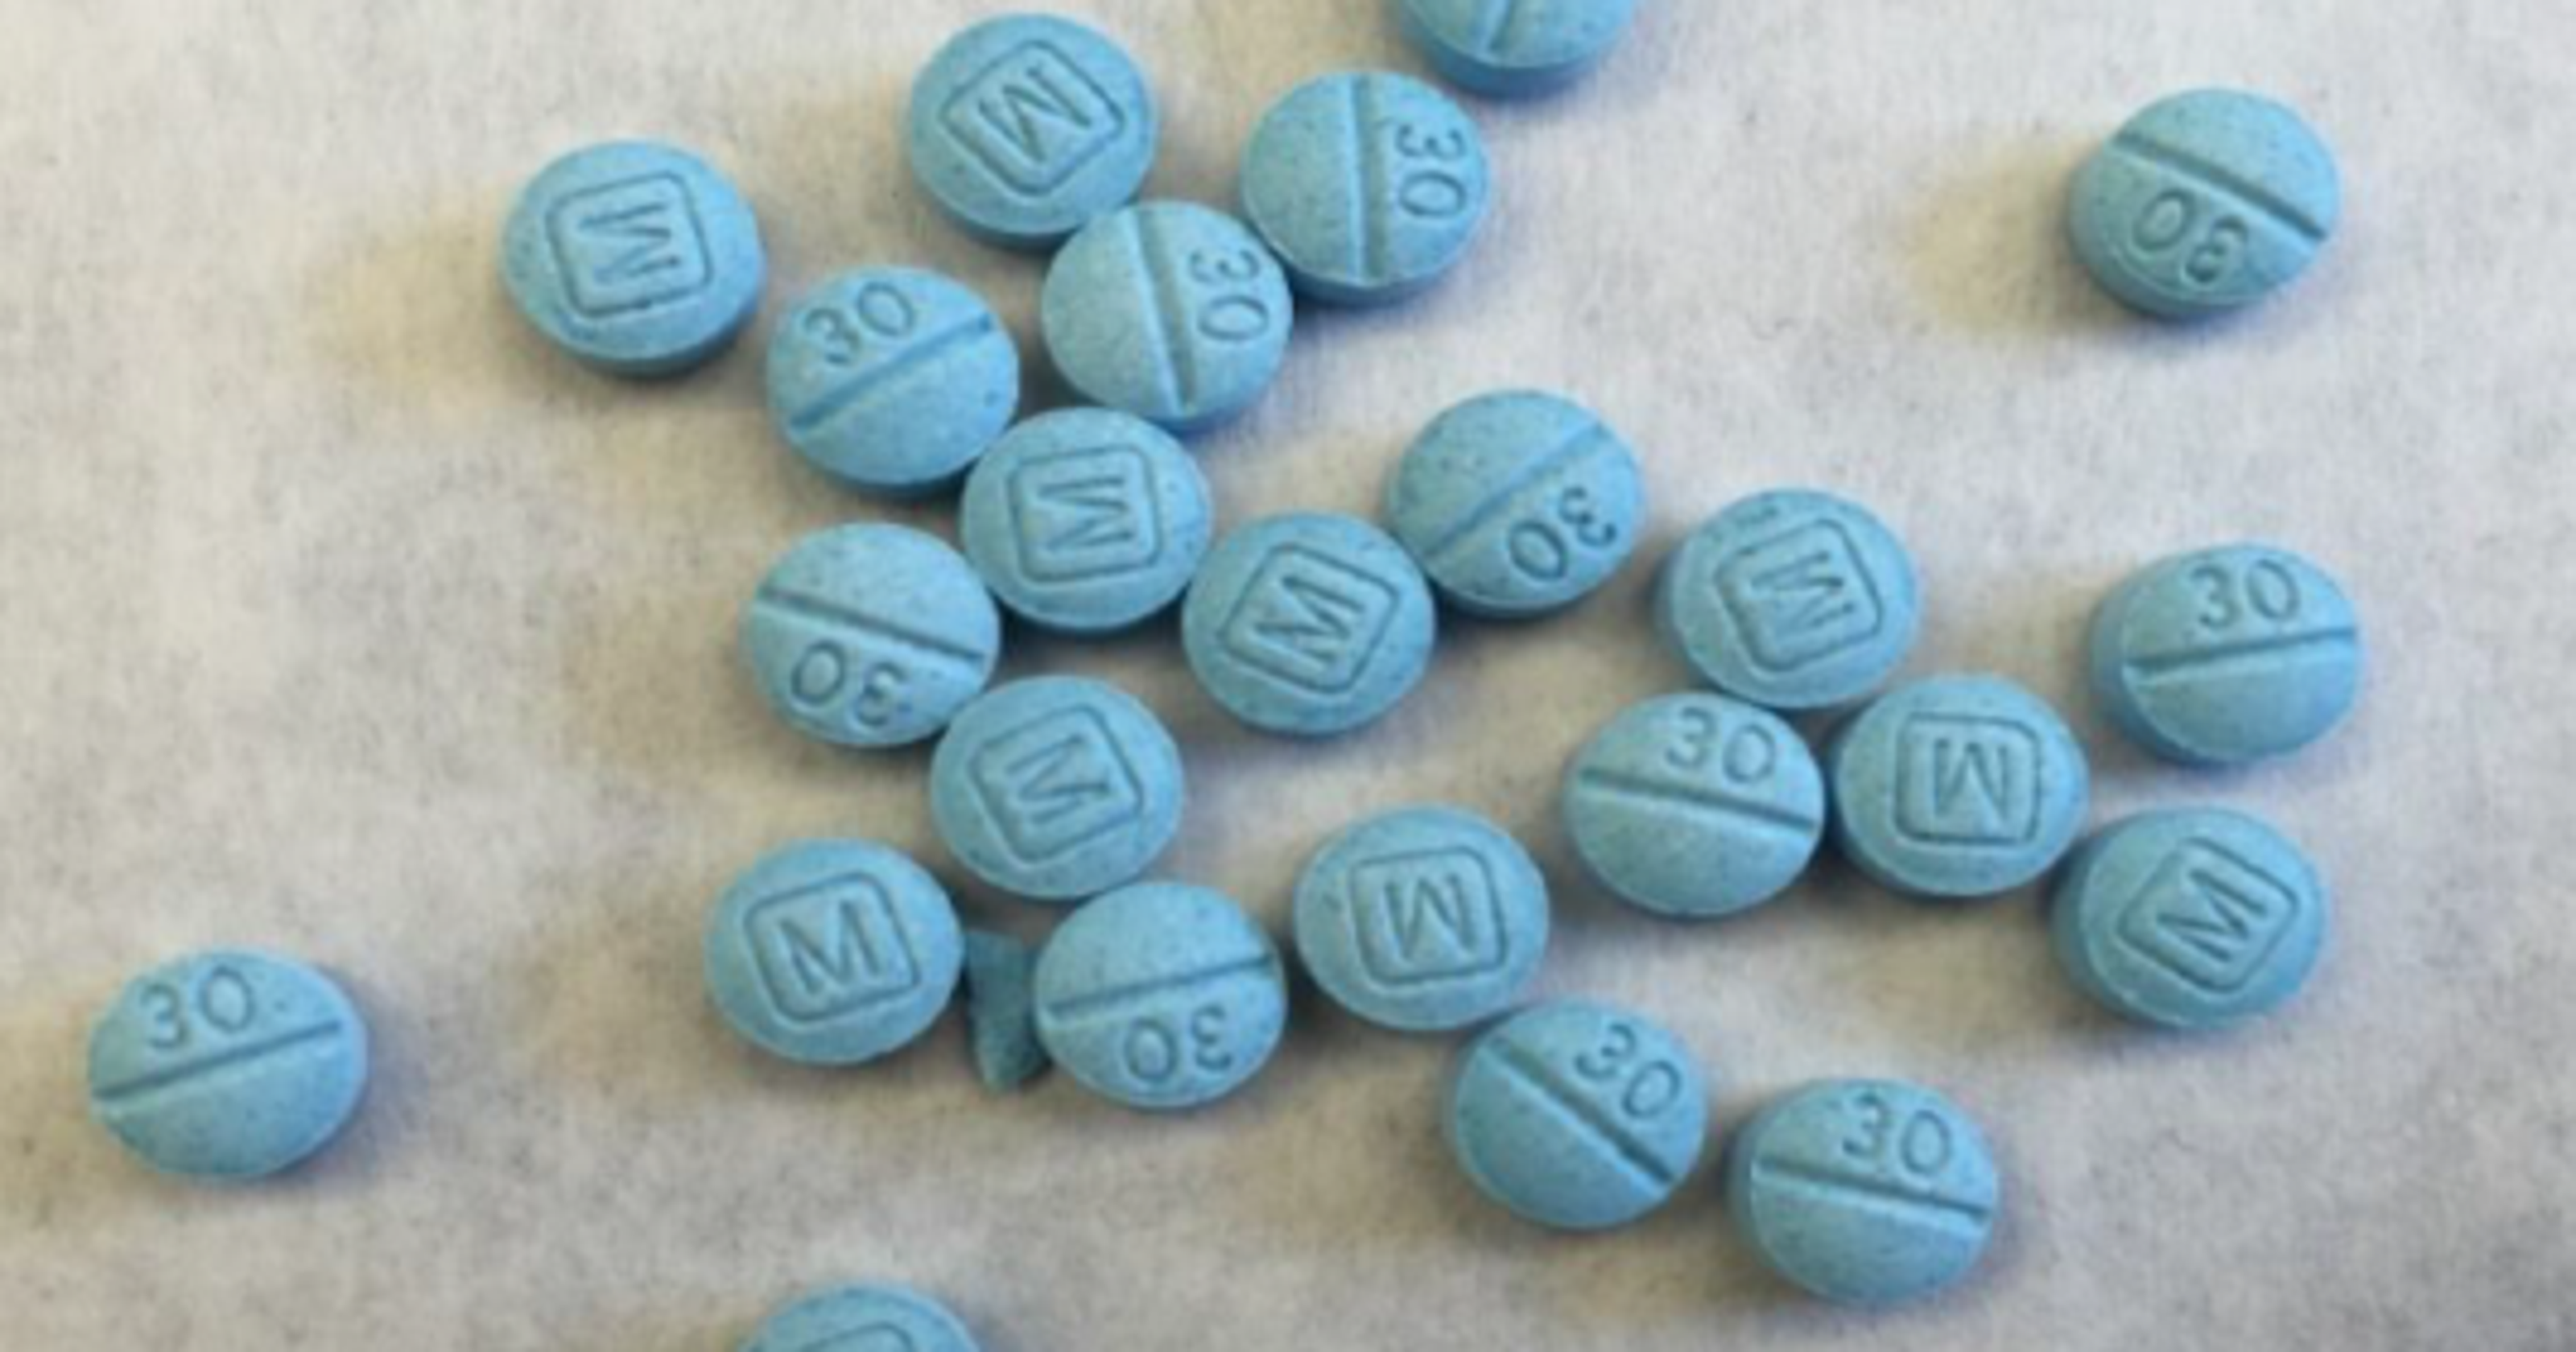 Arizona Woman Convicted Of Dealing Fentanyl Laced Pills That Killed Man